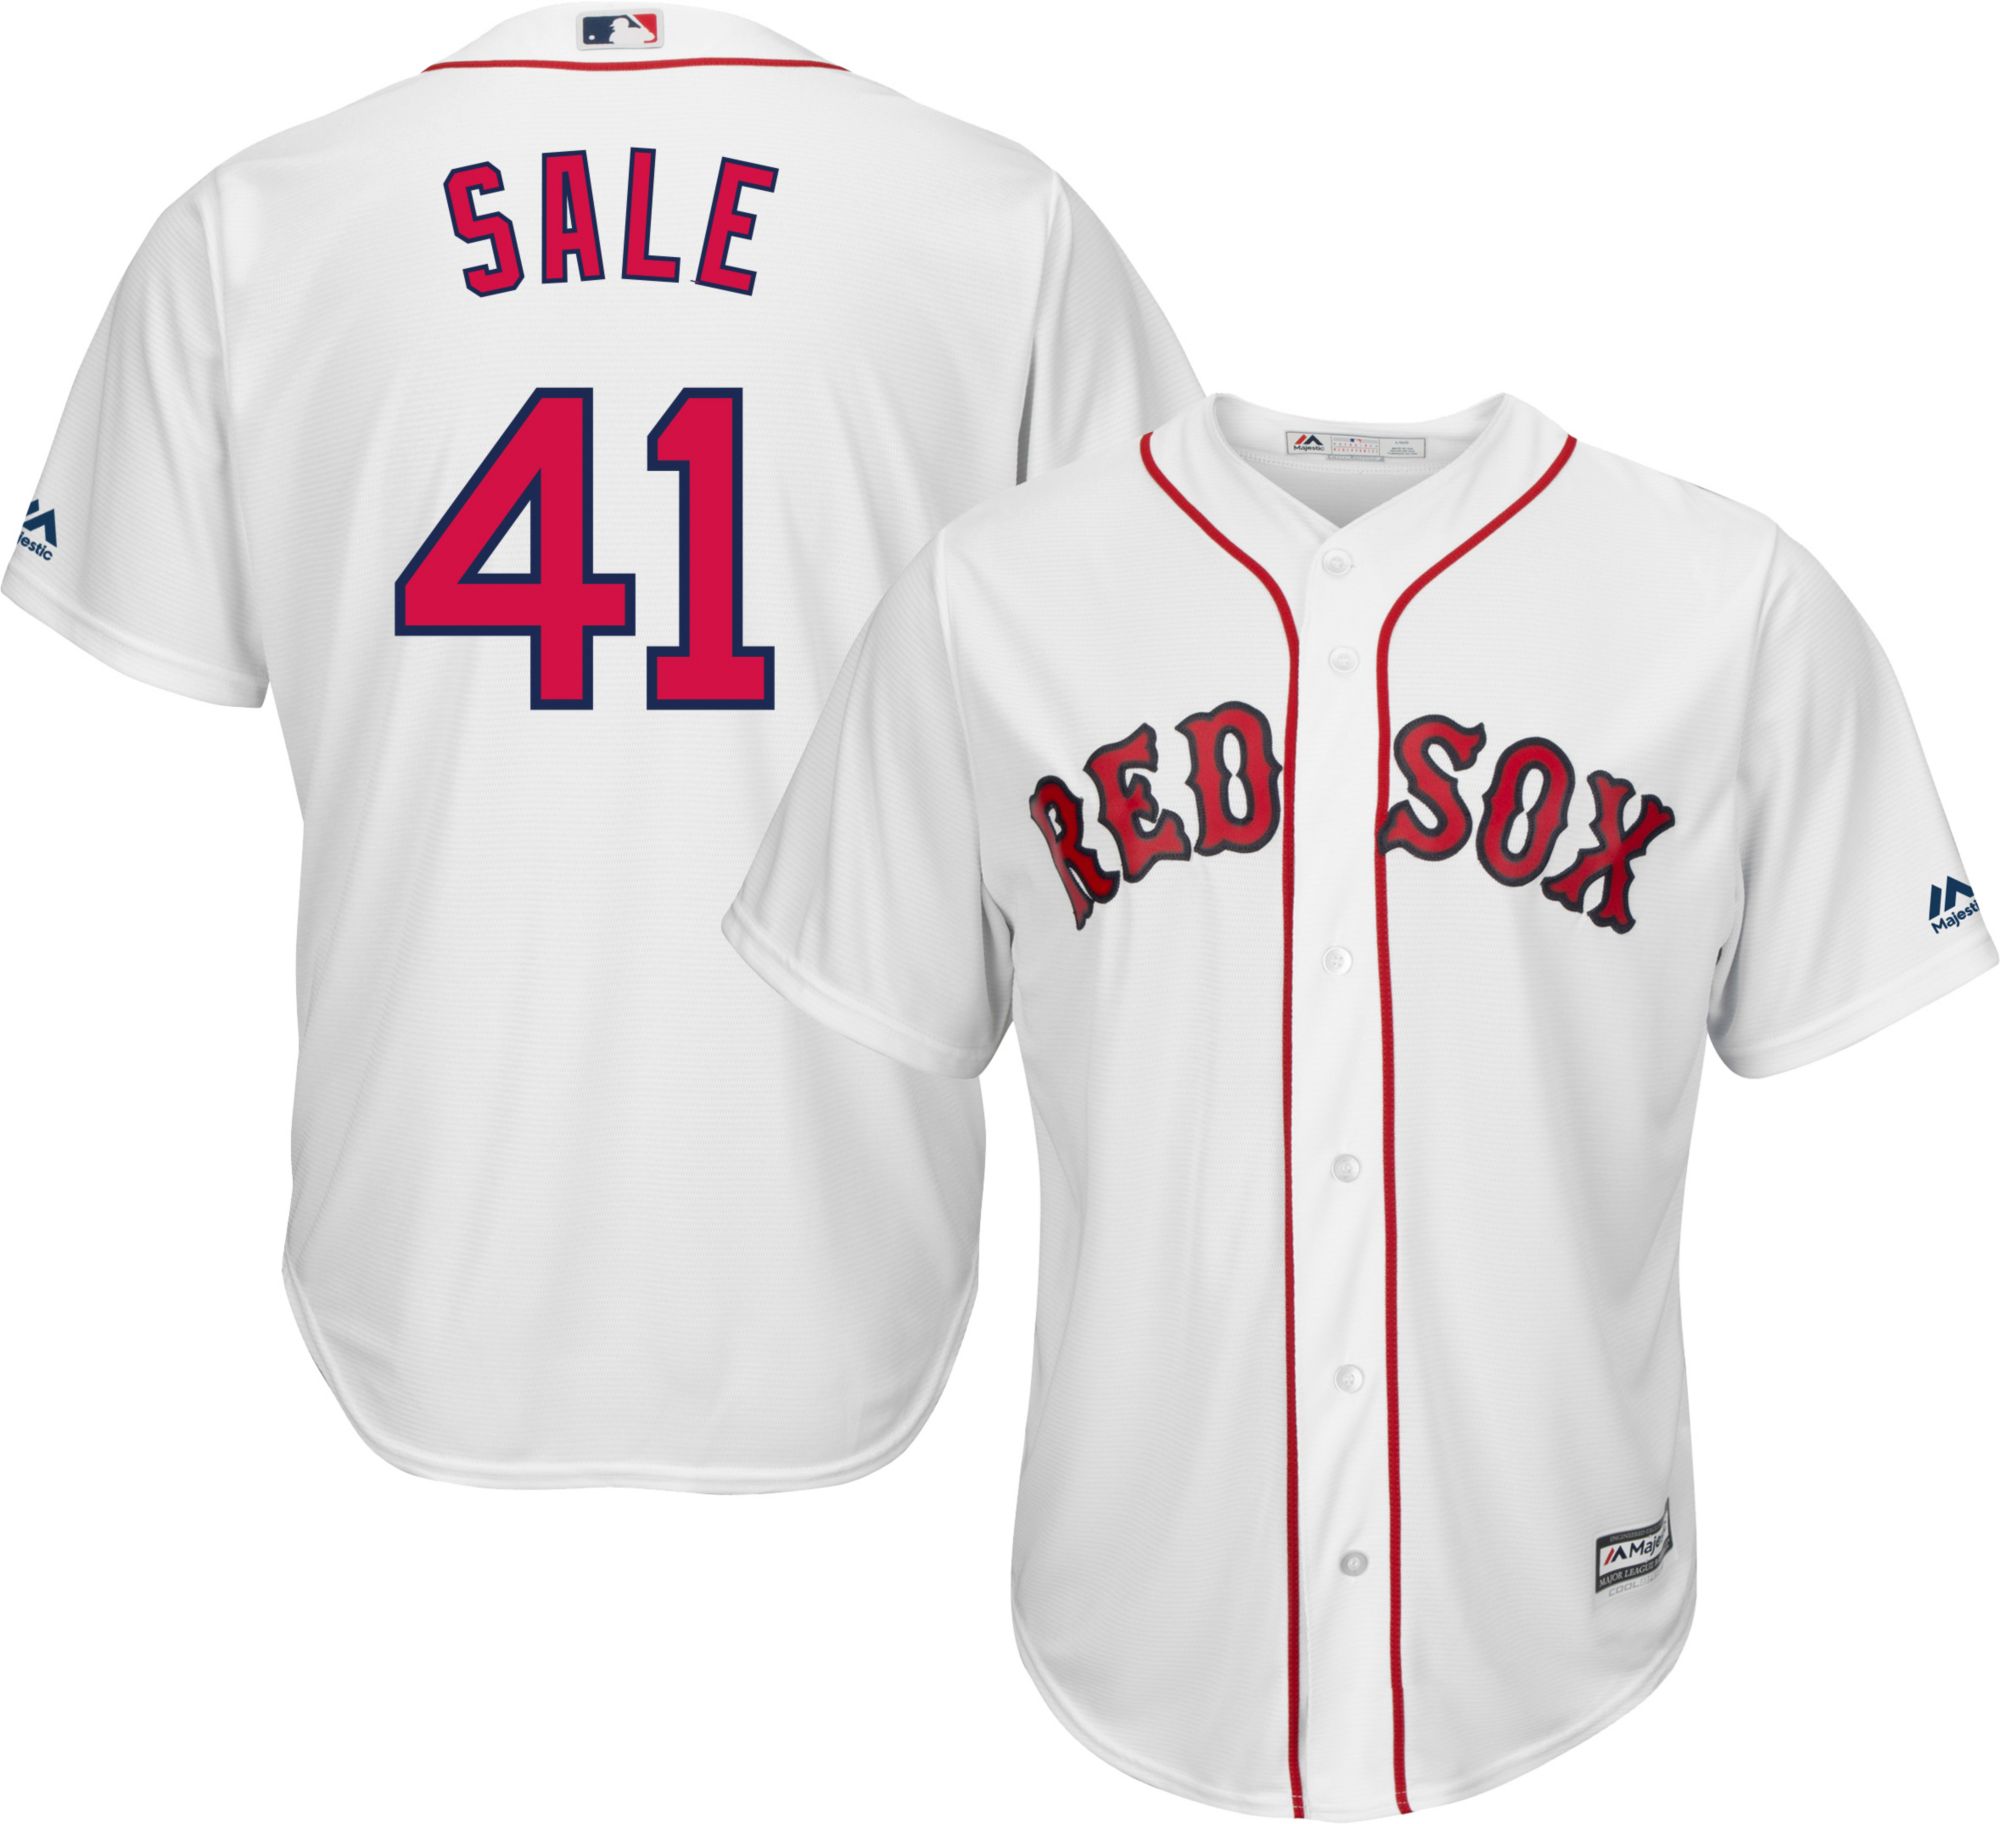 red sox 34 jersey